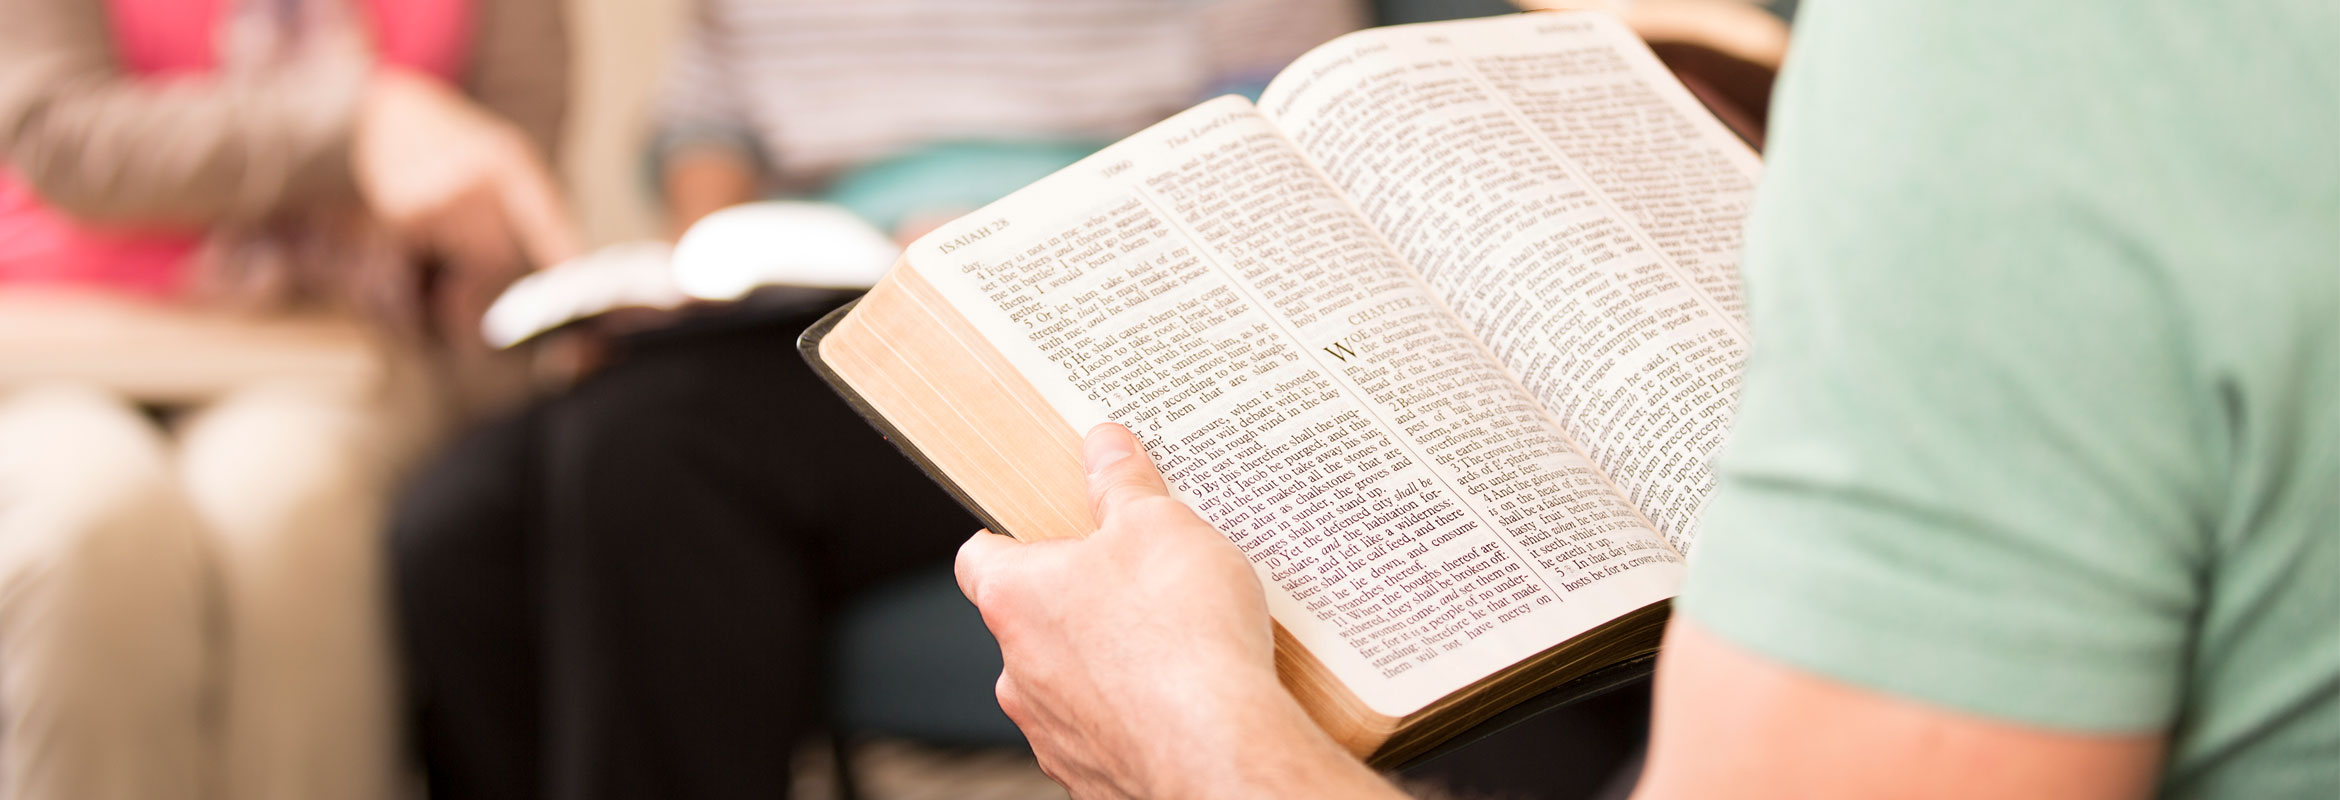 Man and woman studying a Bible while in class image